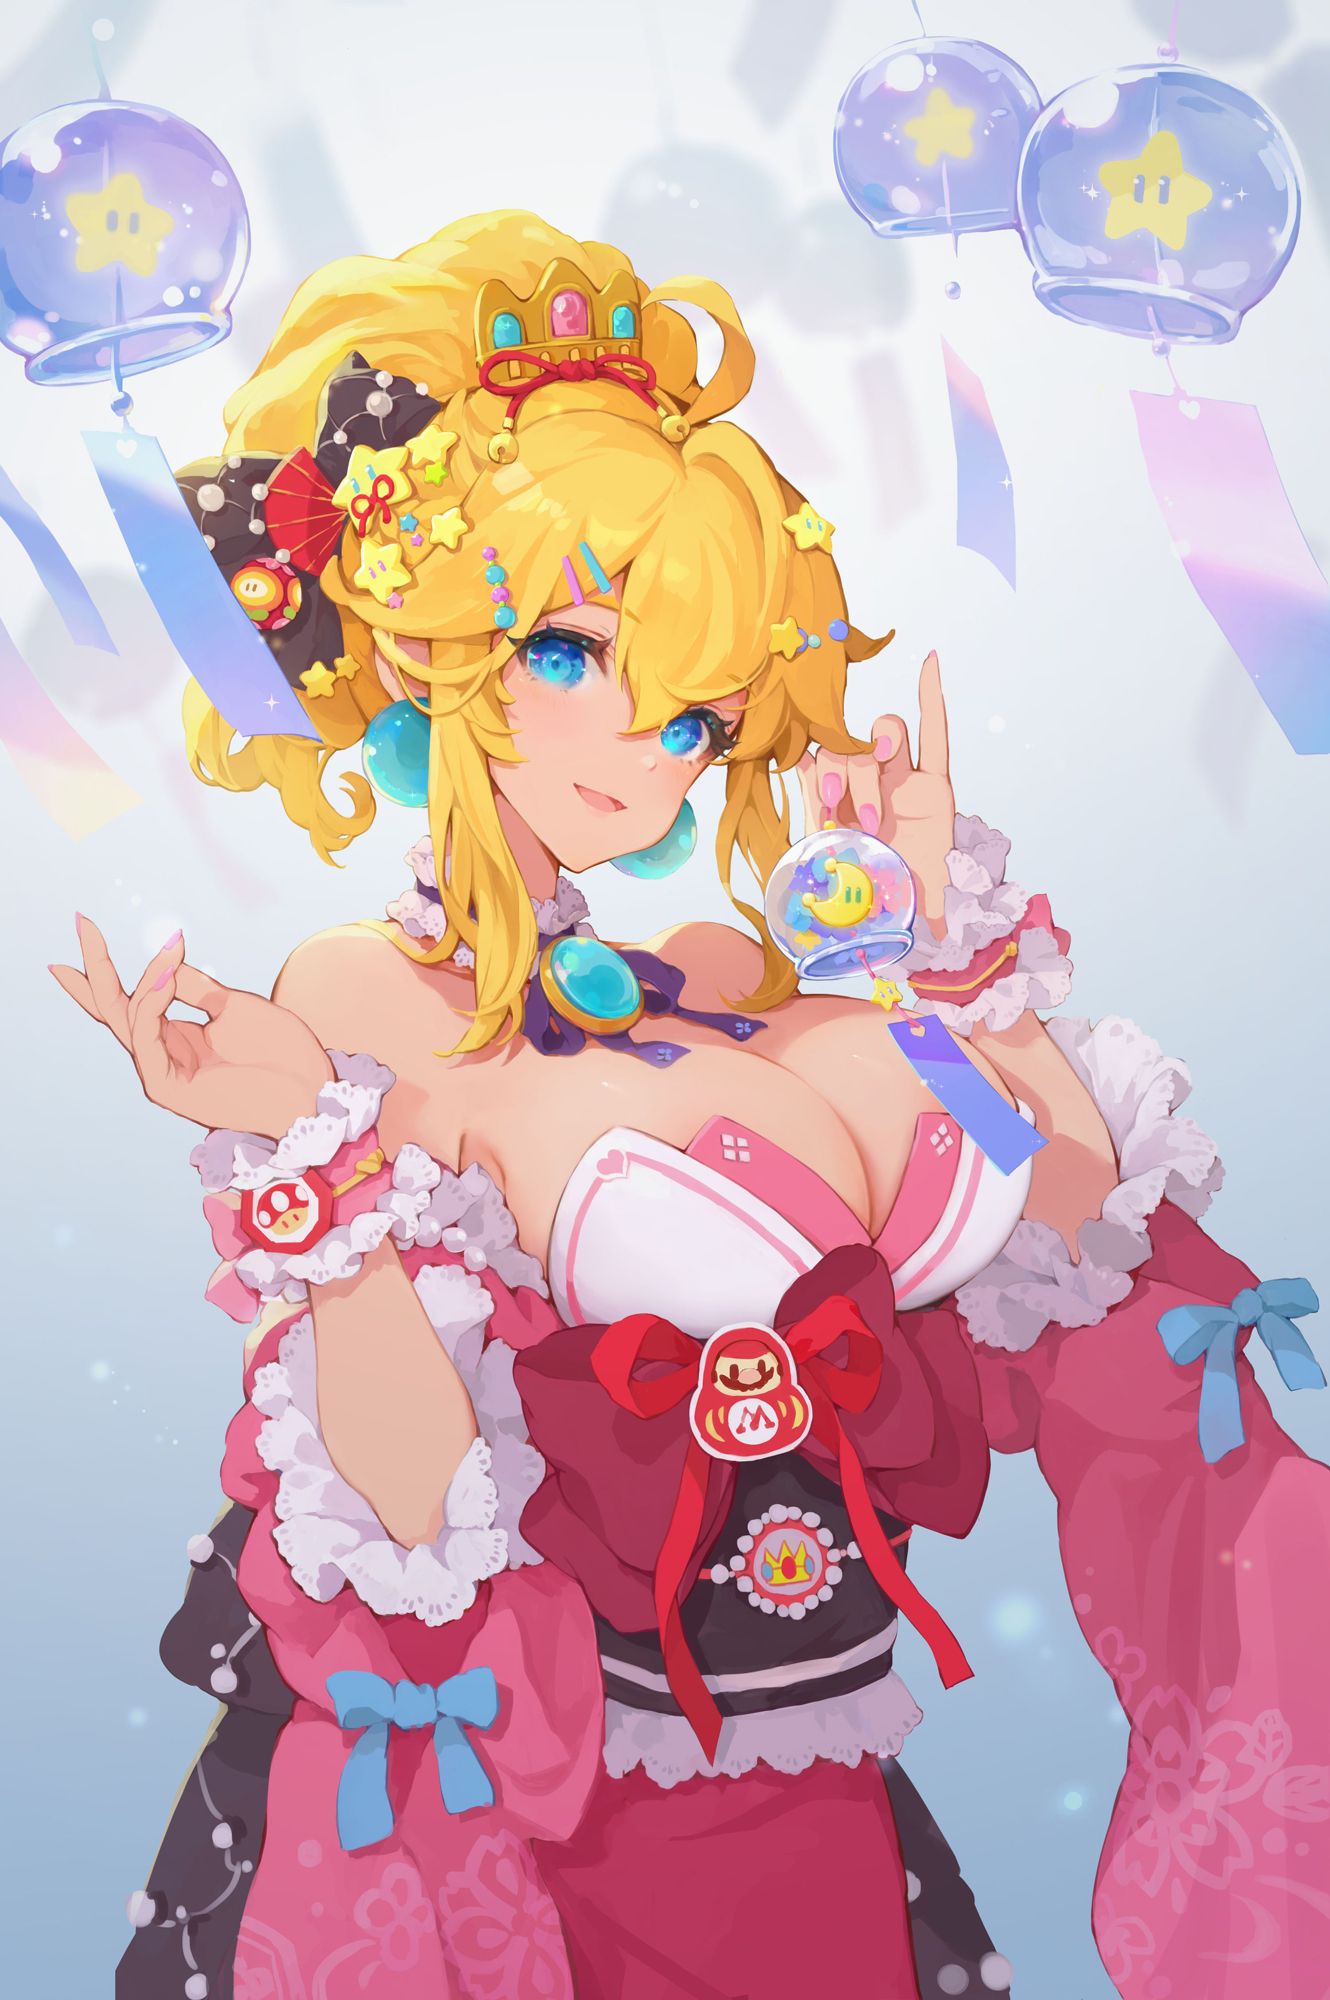 A woman in anime style with big boobs - Princess Peach